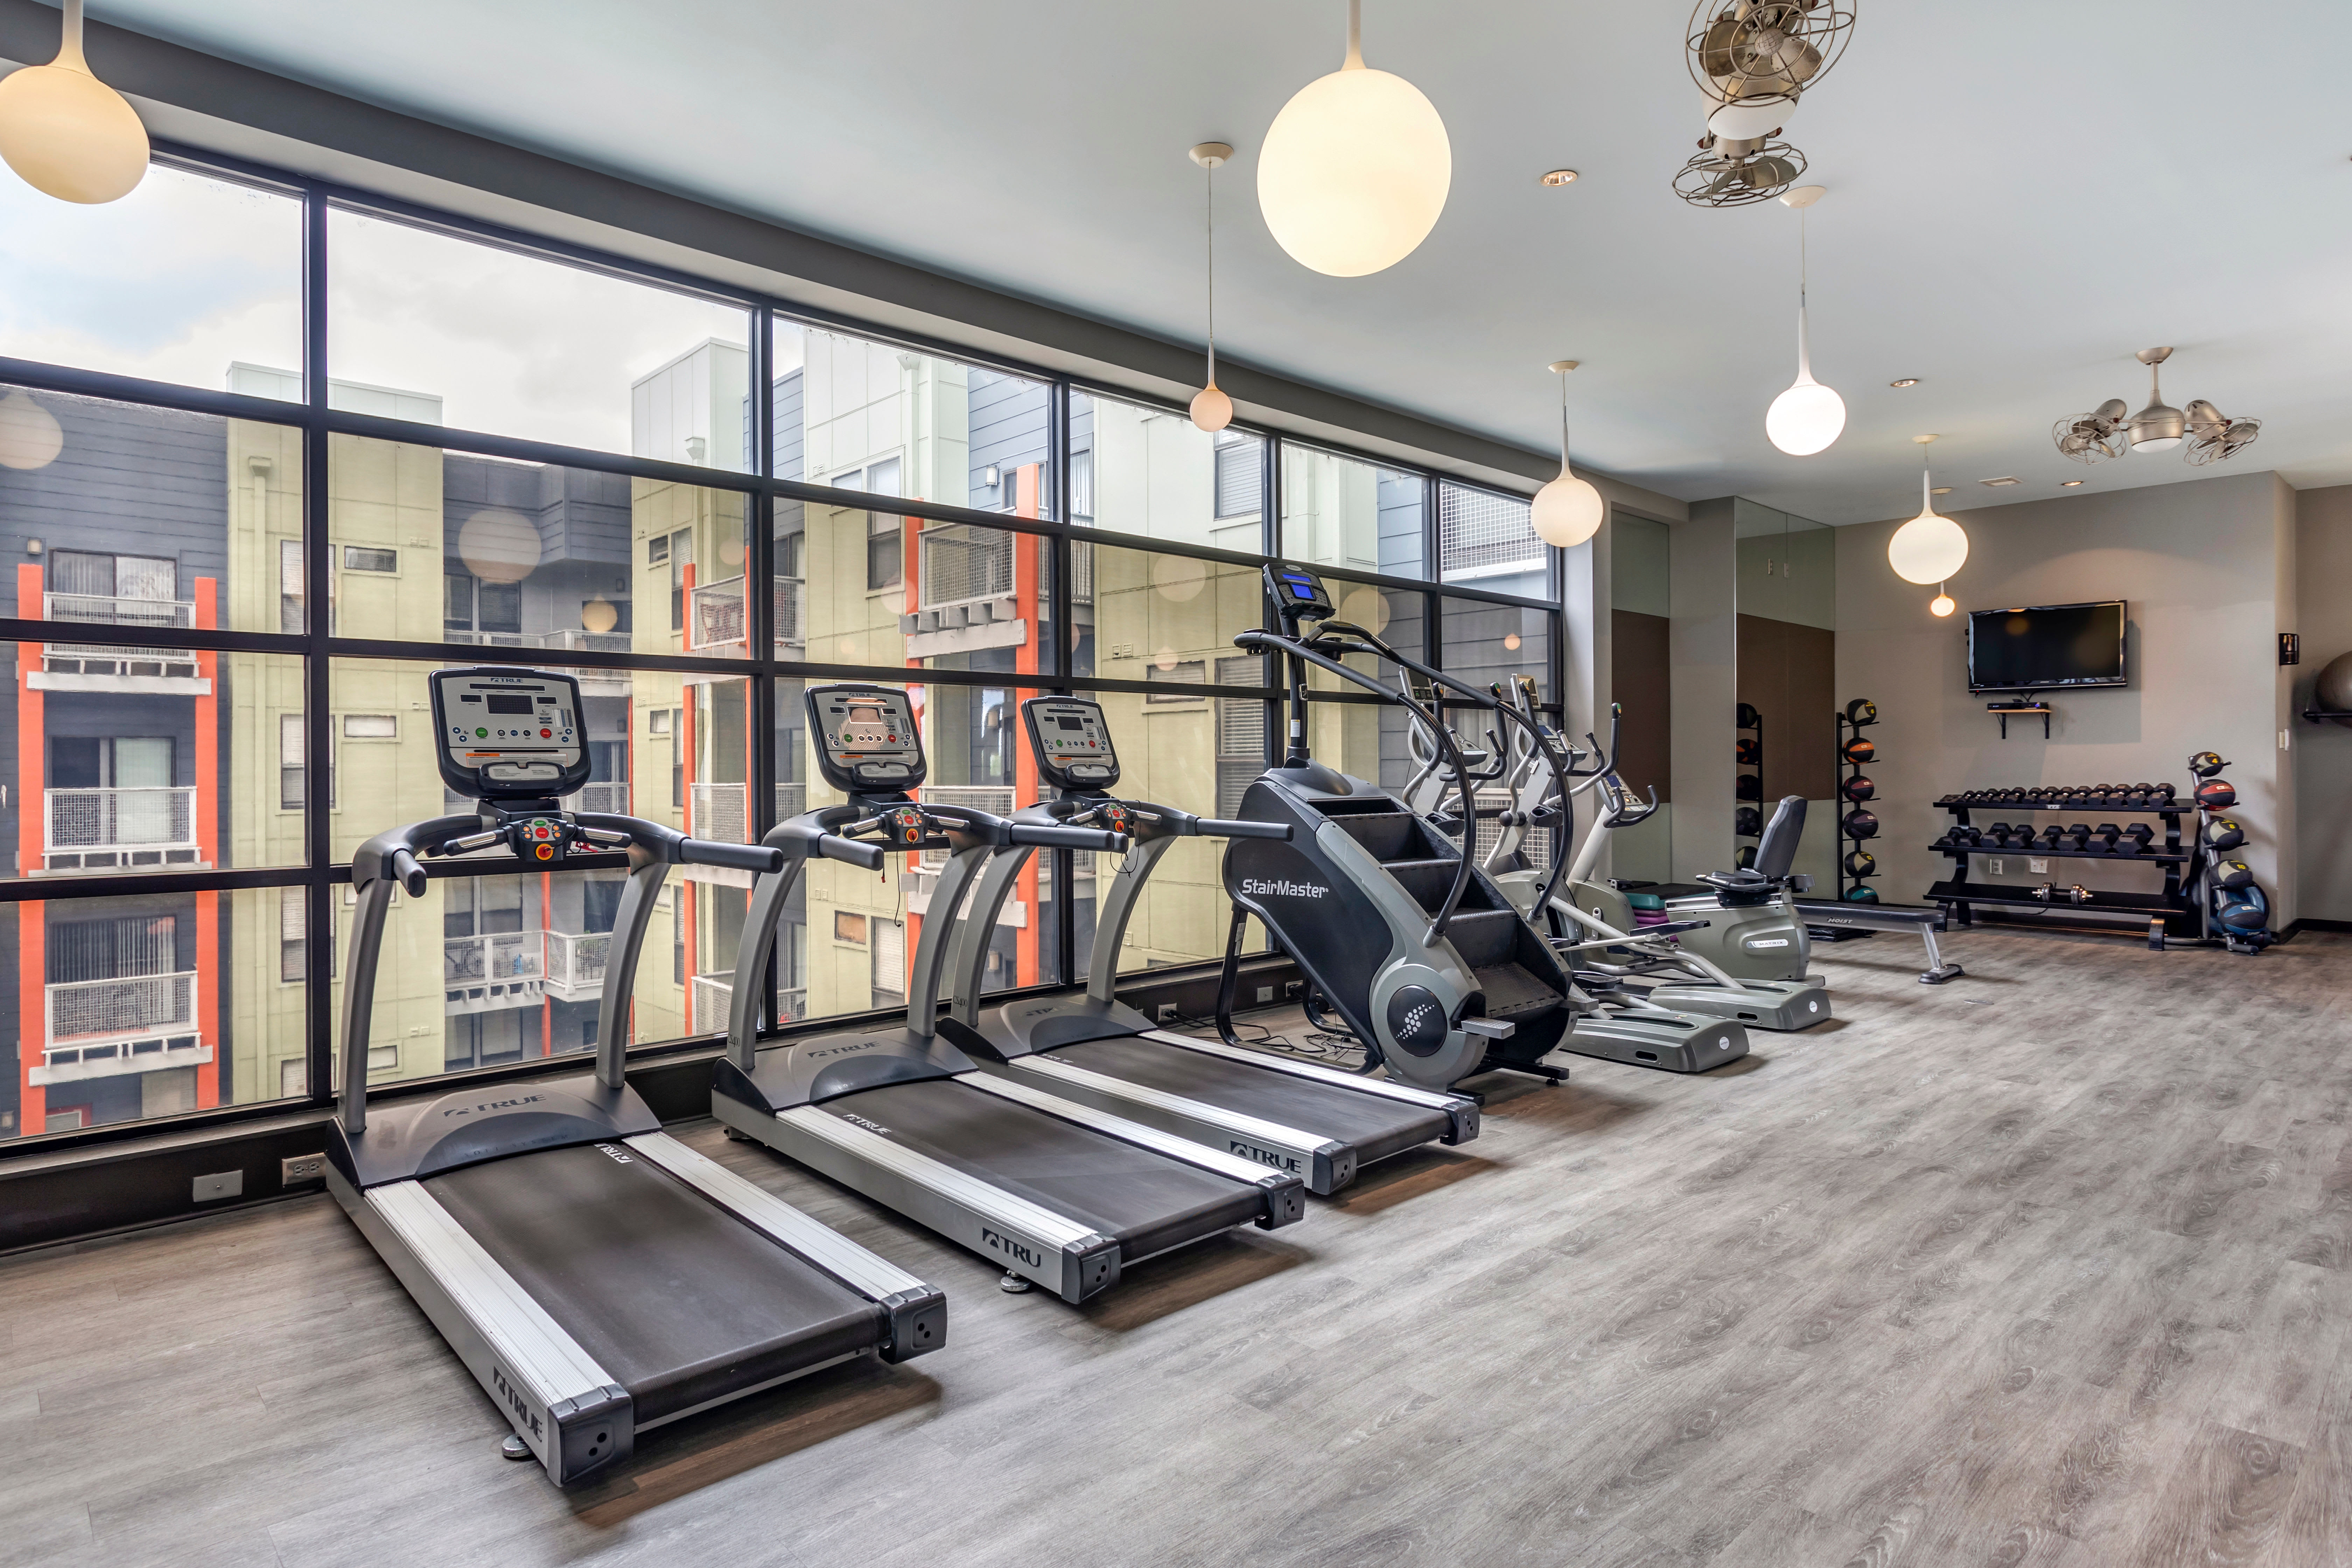 Plenty of cardio equipment in the fitness center at Olympus Midtown in Nashville, Tennessee